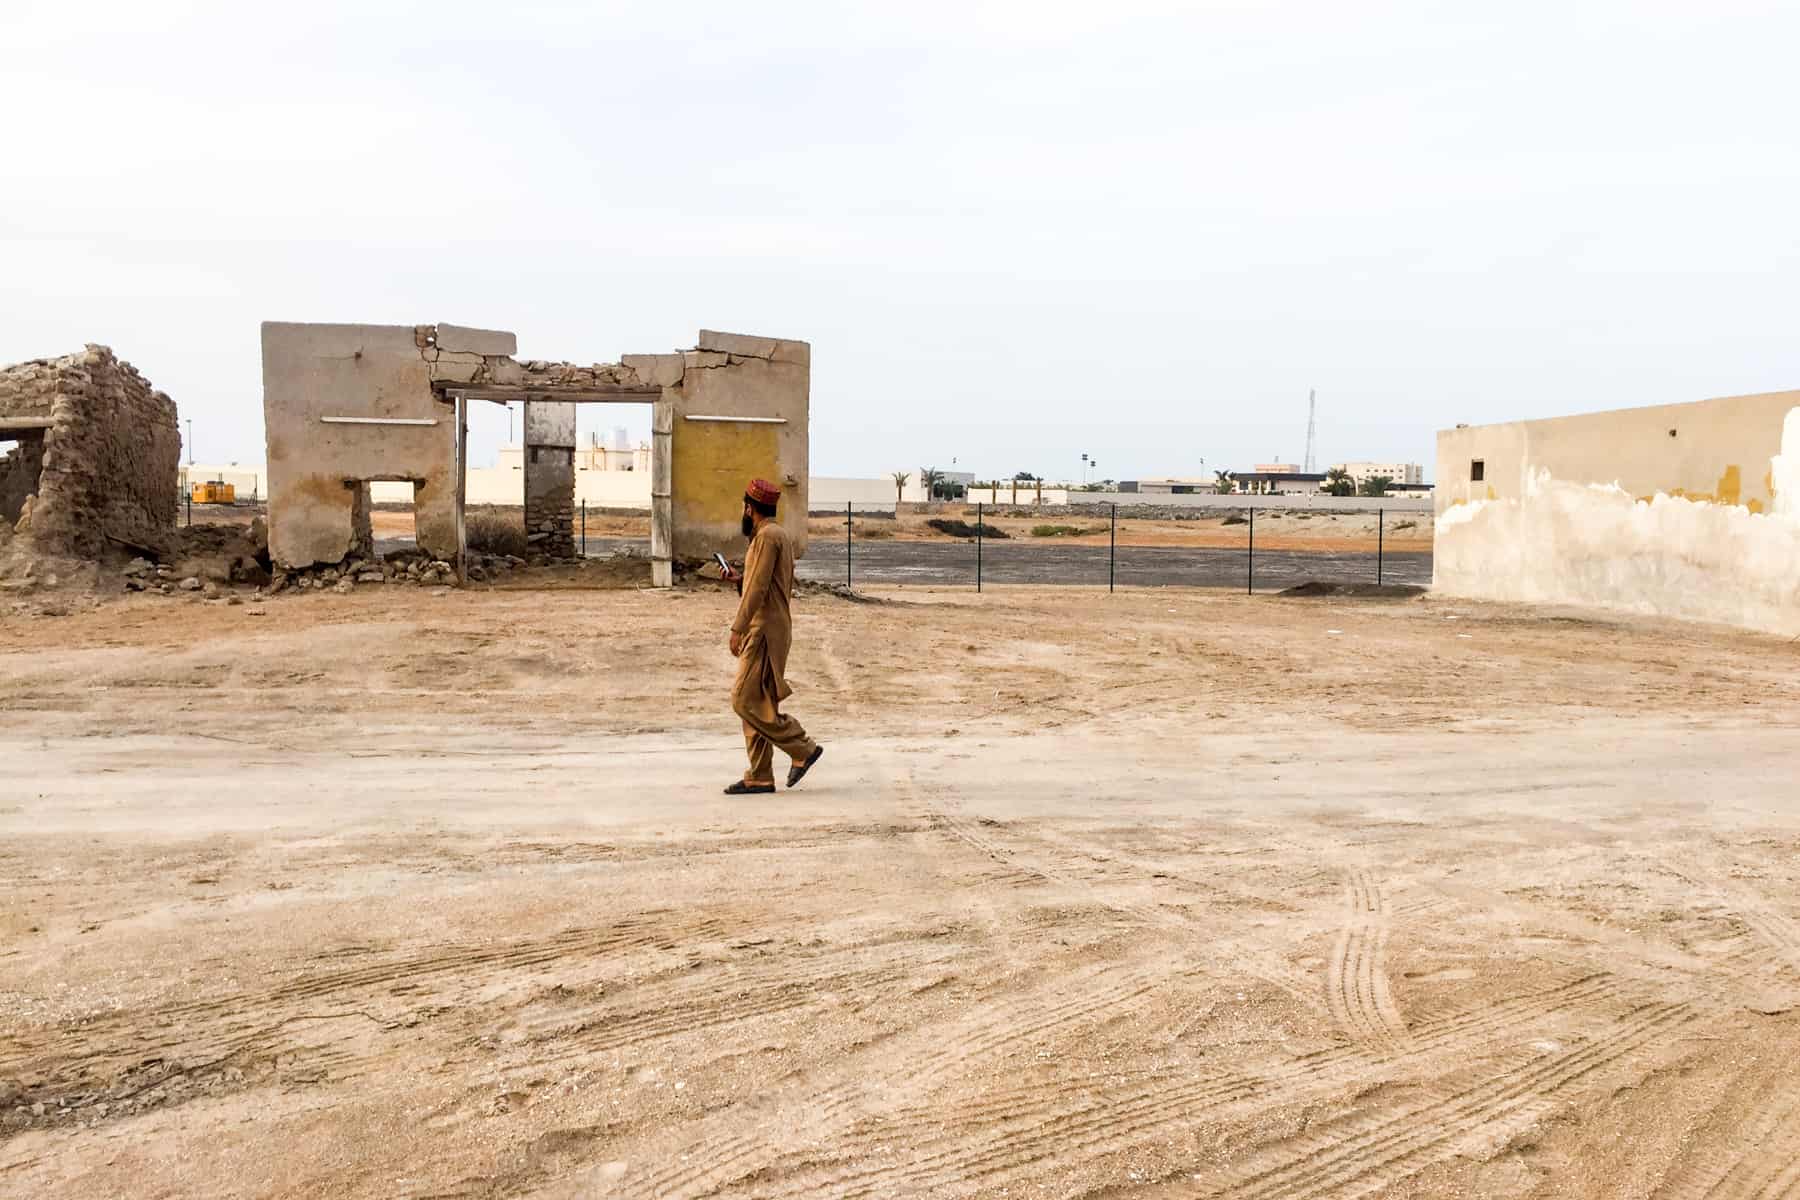 A man in dark beige overalls and a red hate walks through a sandy area in front of crumbling buildings that make up a ghost town in Ras Al Khaimah, UAE